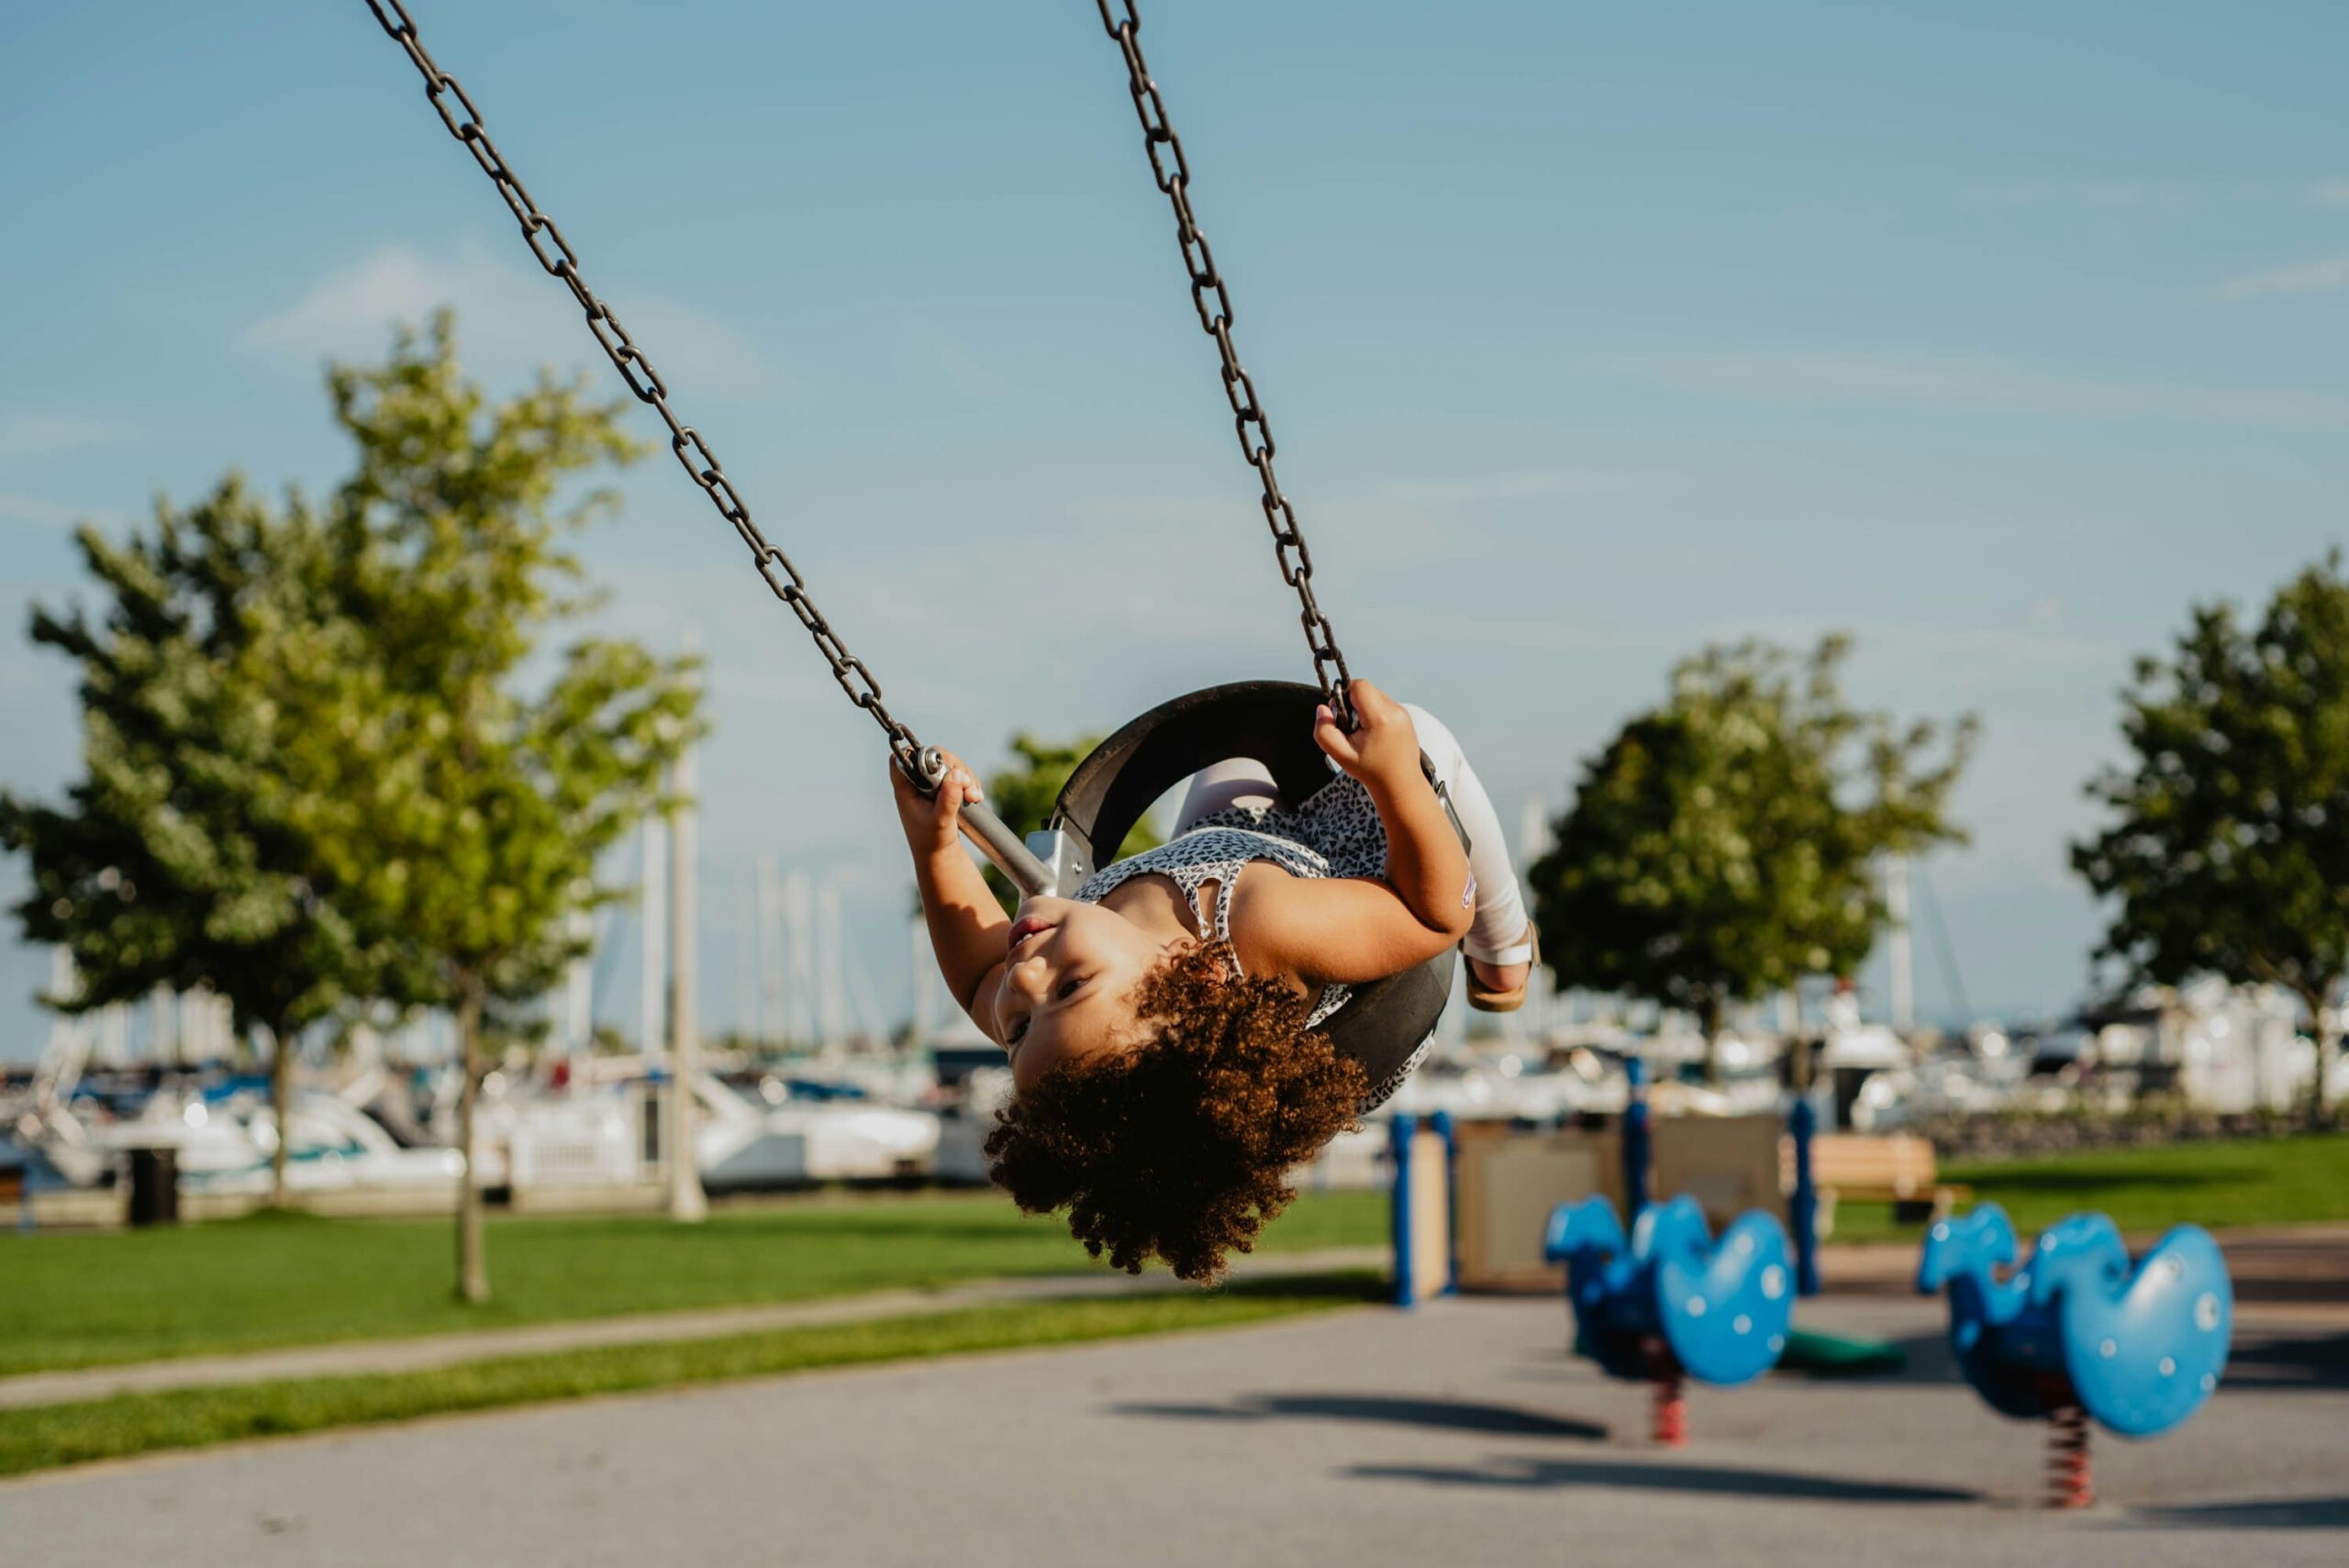 San Diego is family friendly during fall. 
Pictured: a child on the swings in San Diego